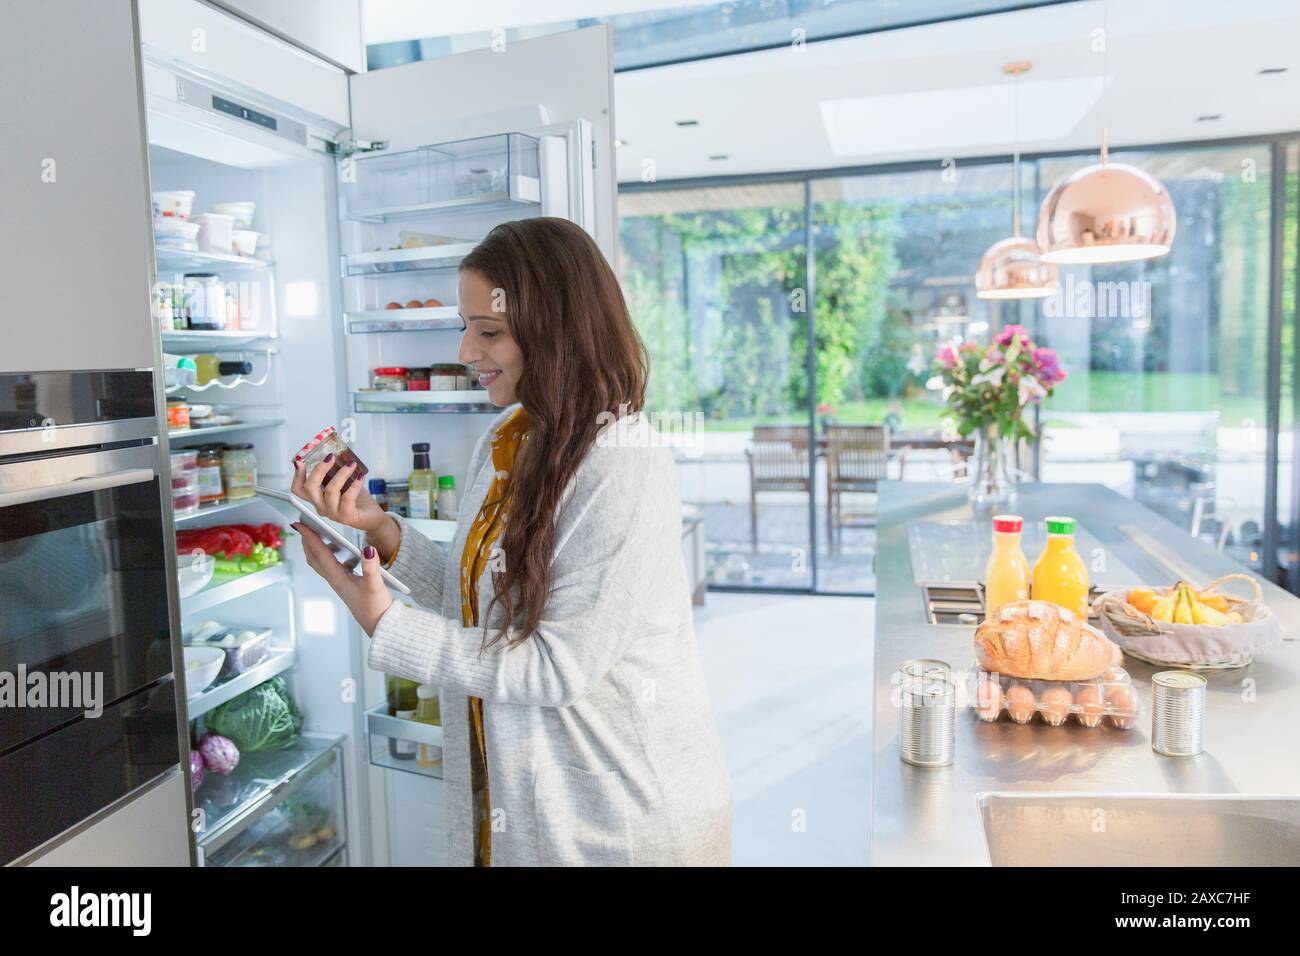 Woman with digital tablet at refrigerator in kitchen Stock Photo